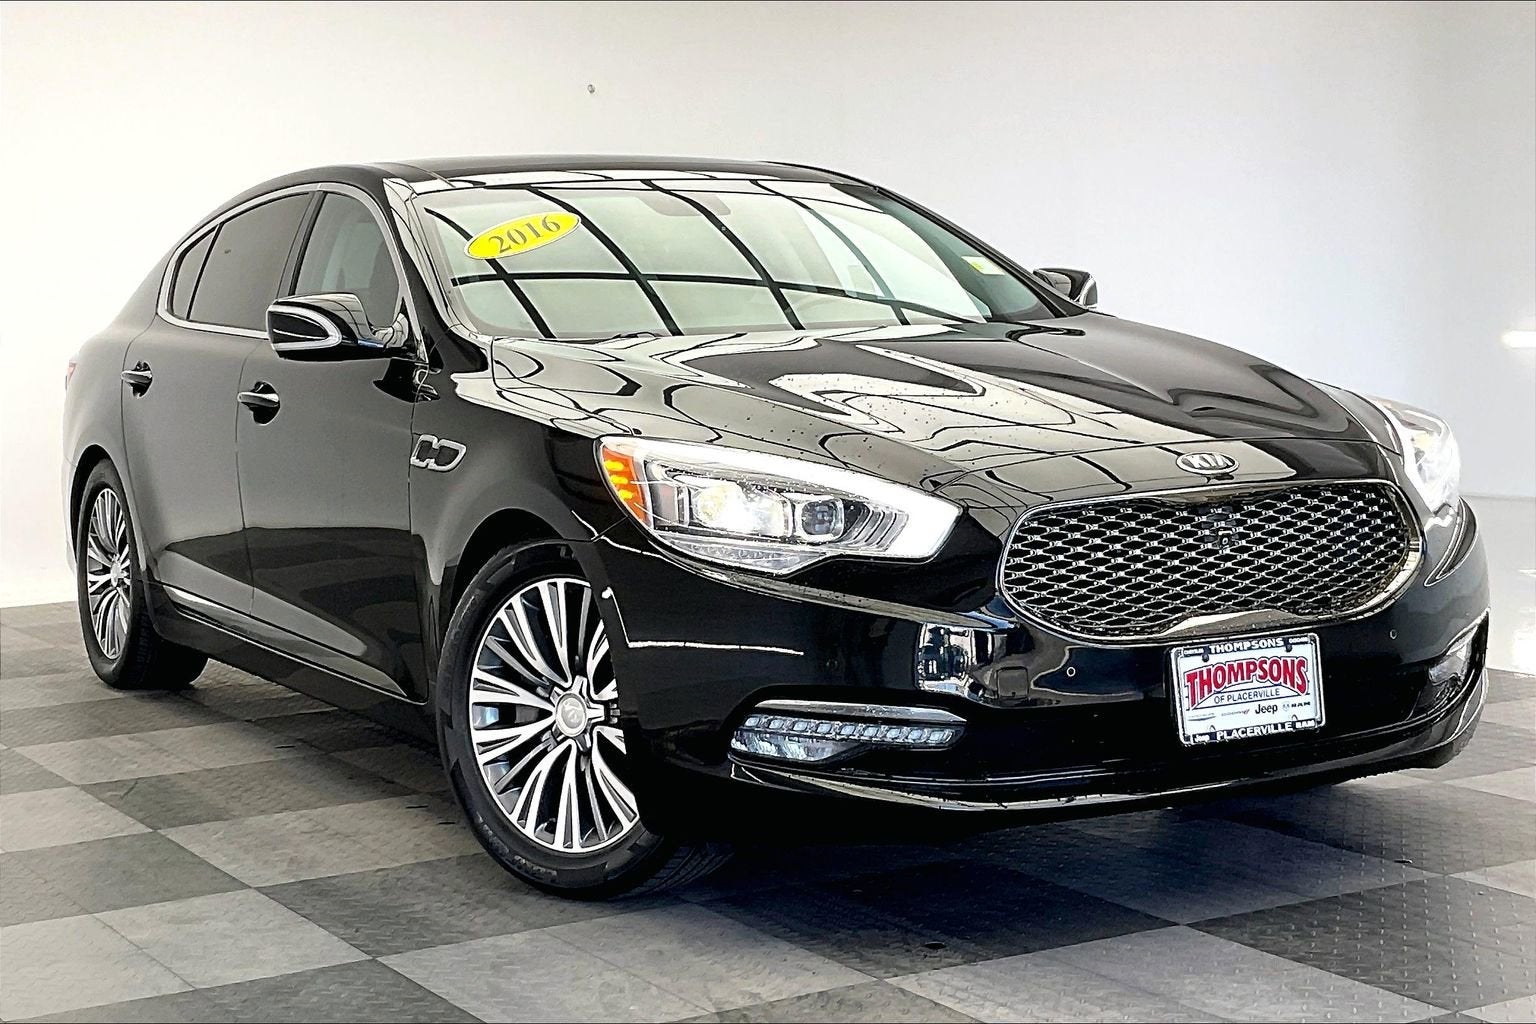 Used 2016 Kia K900 For Sale Placerville CA | Near Cameron Park | UF33184